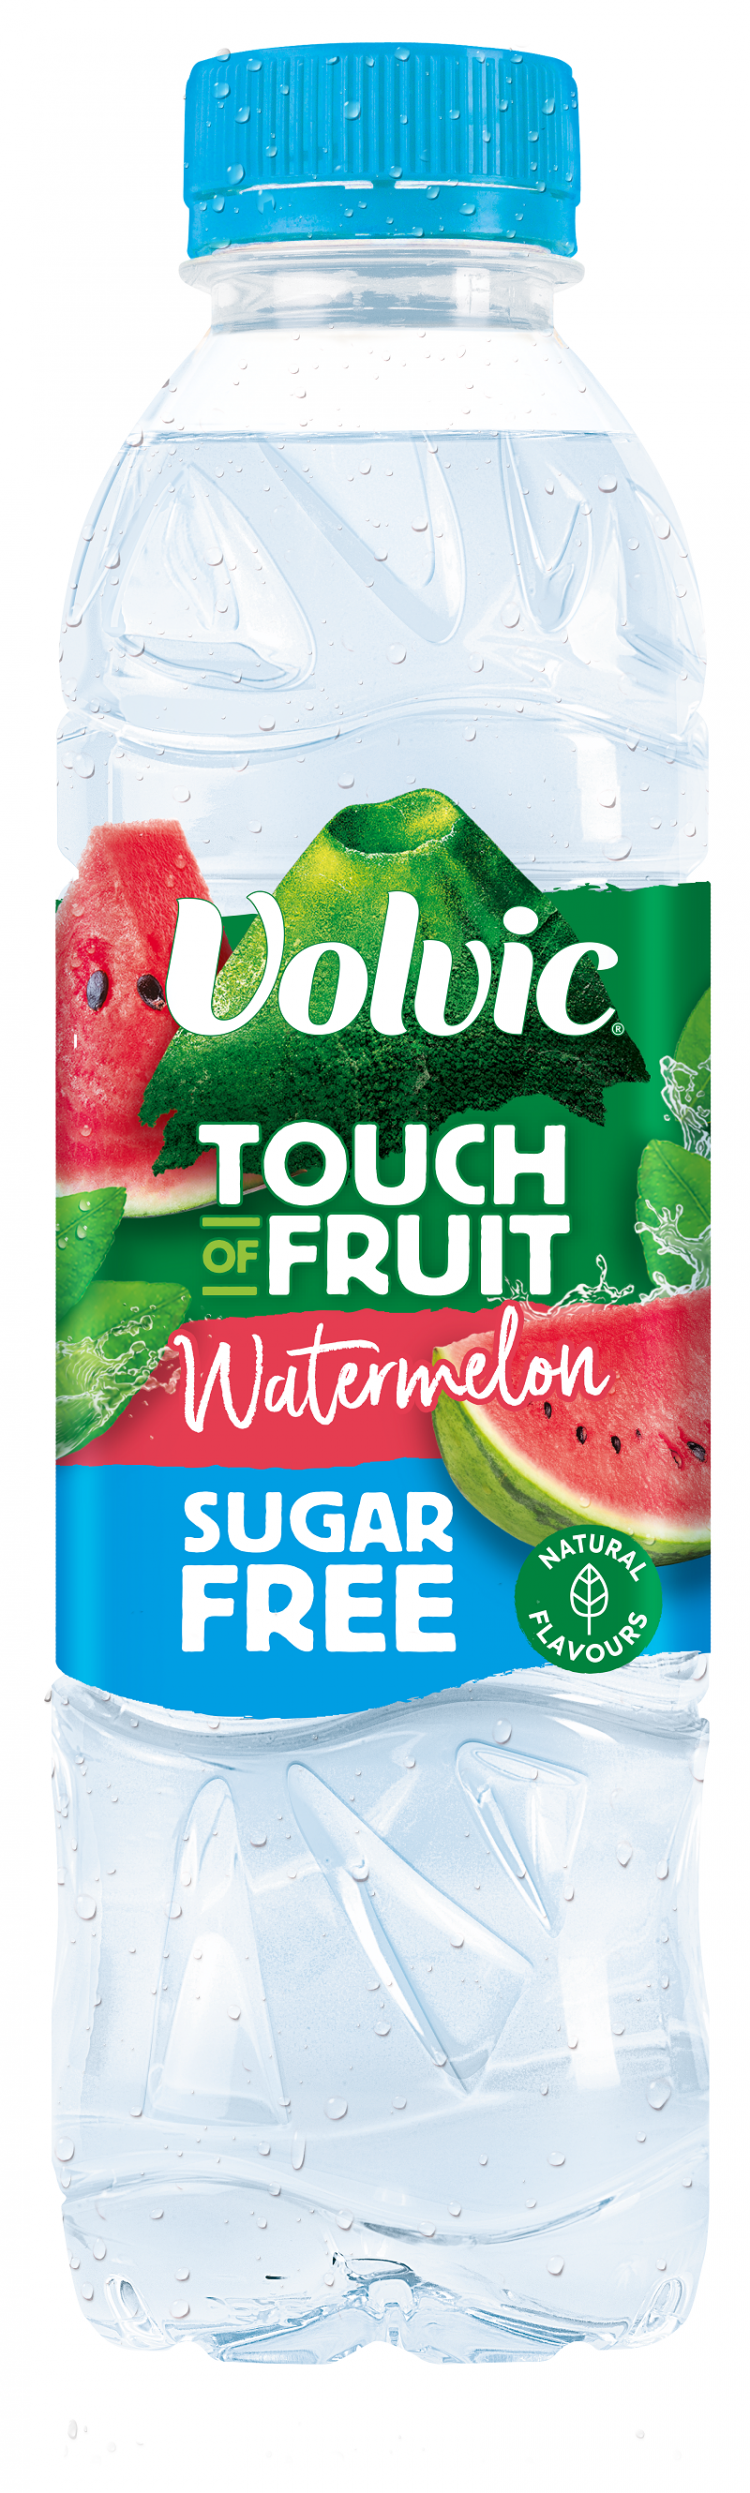 Volvic announce flavoured water rebrand 